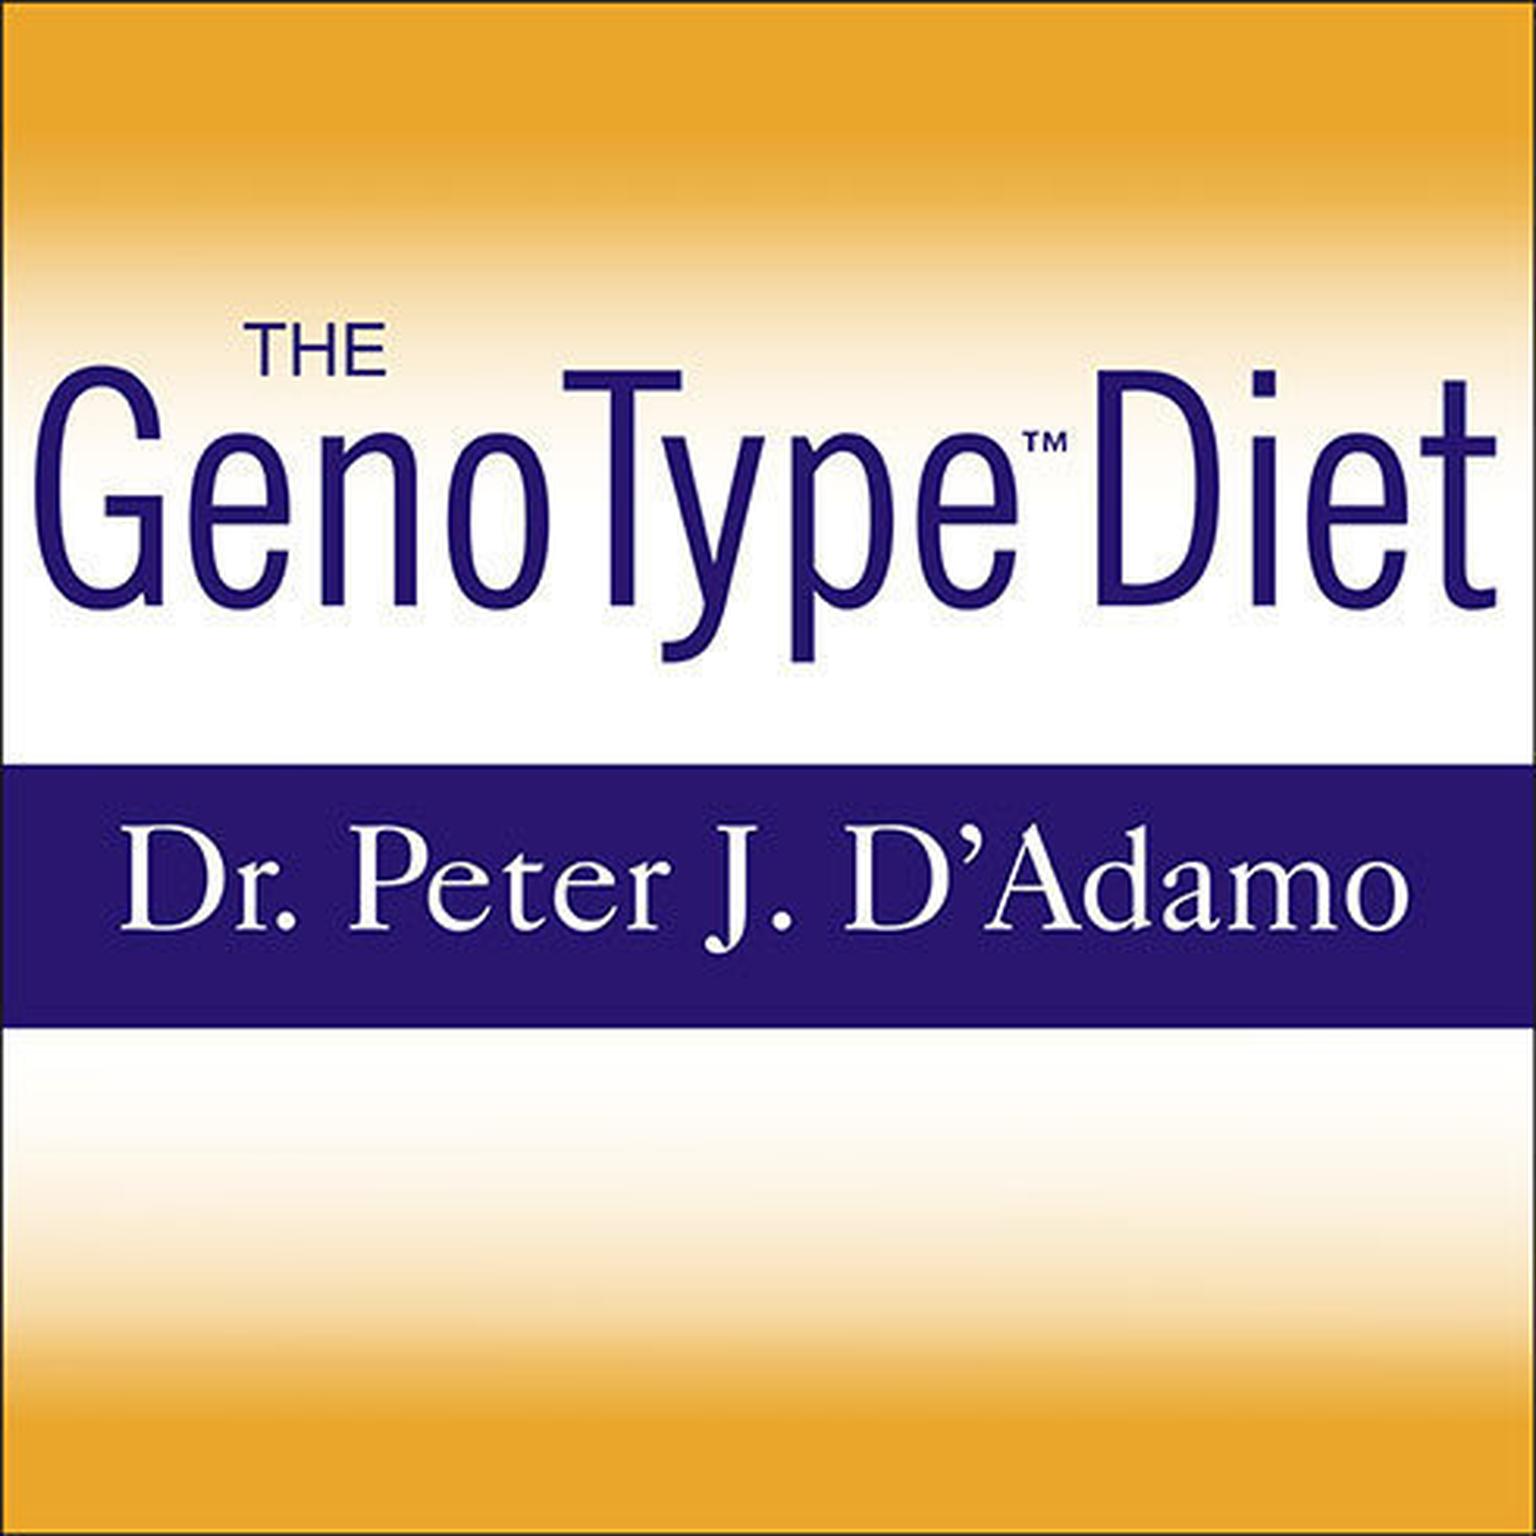 The GenoType Diet: Change Your Genetic Destiny to Live the Longest, Fullest and Healthiest Life Possible Audiobook, by Peter J. D’Adamo